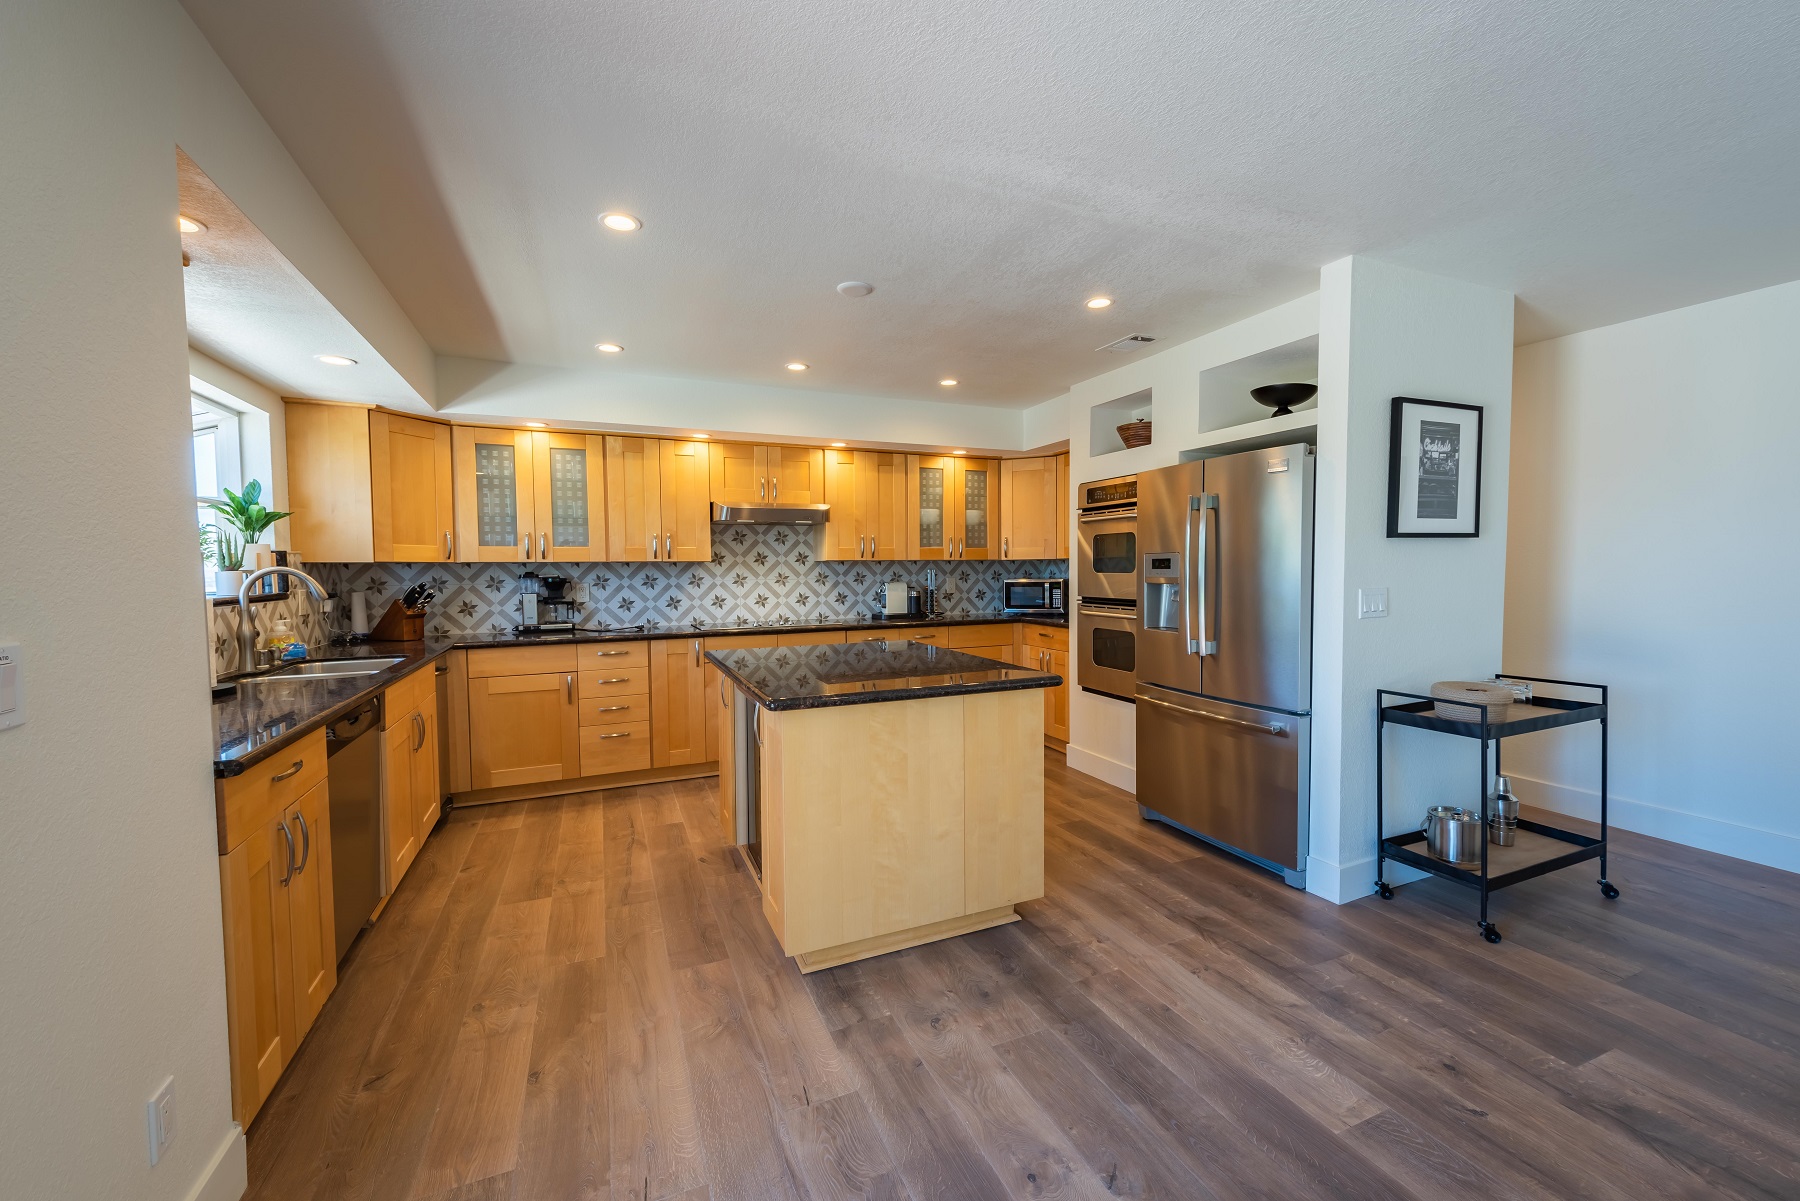 Fully-stocked kitchen with all stainless steel appliances